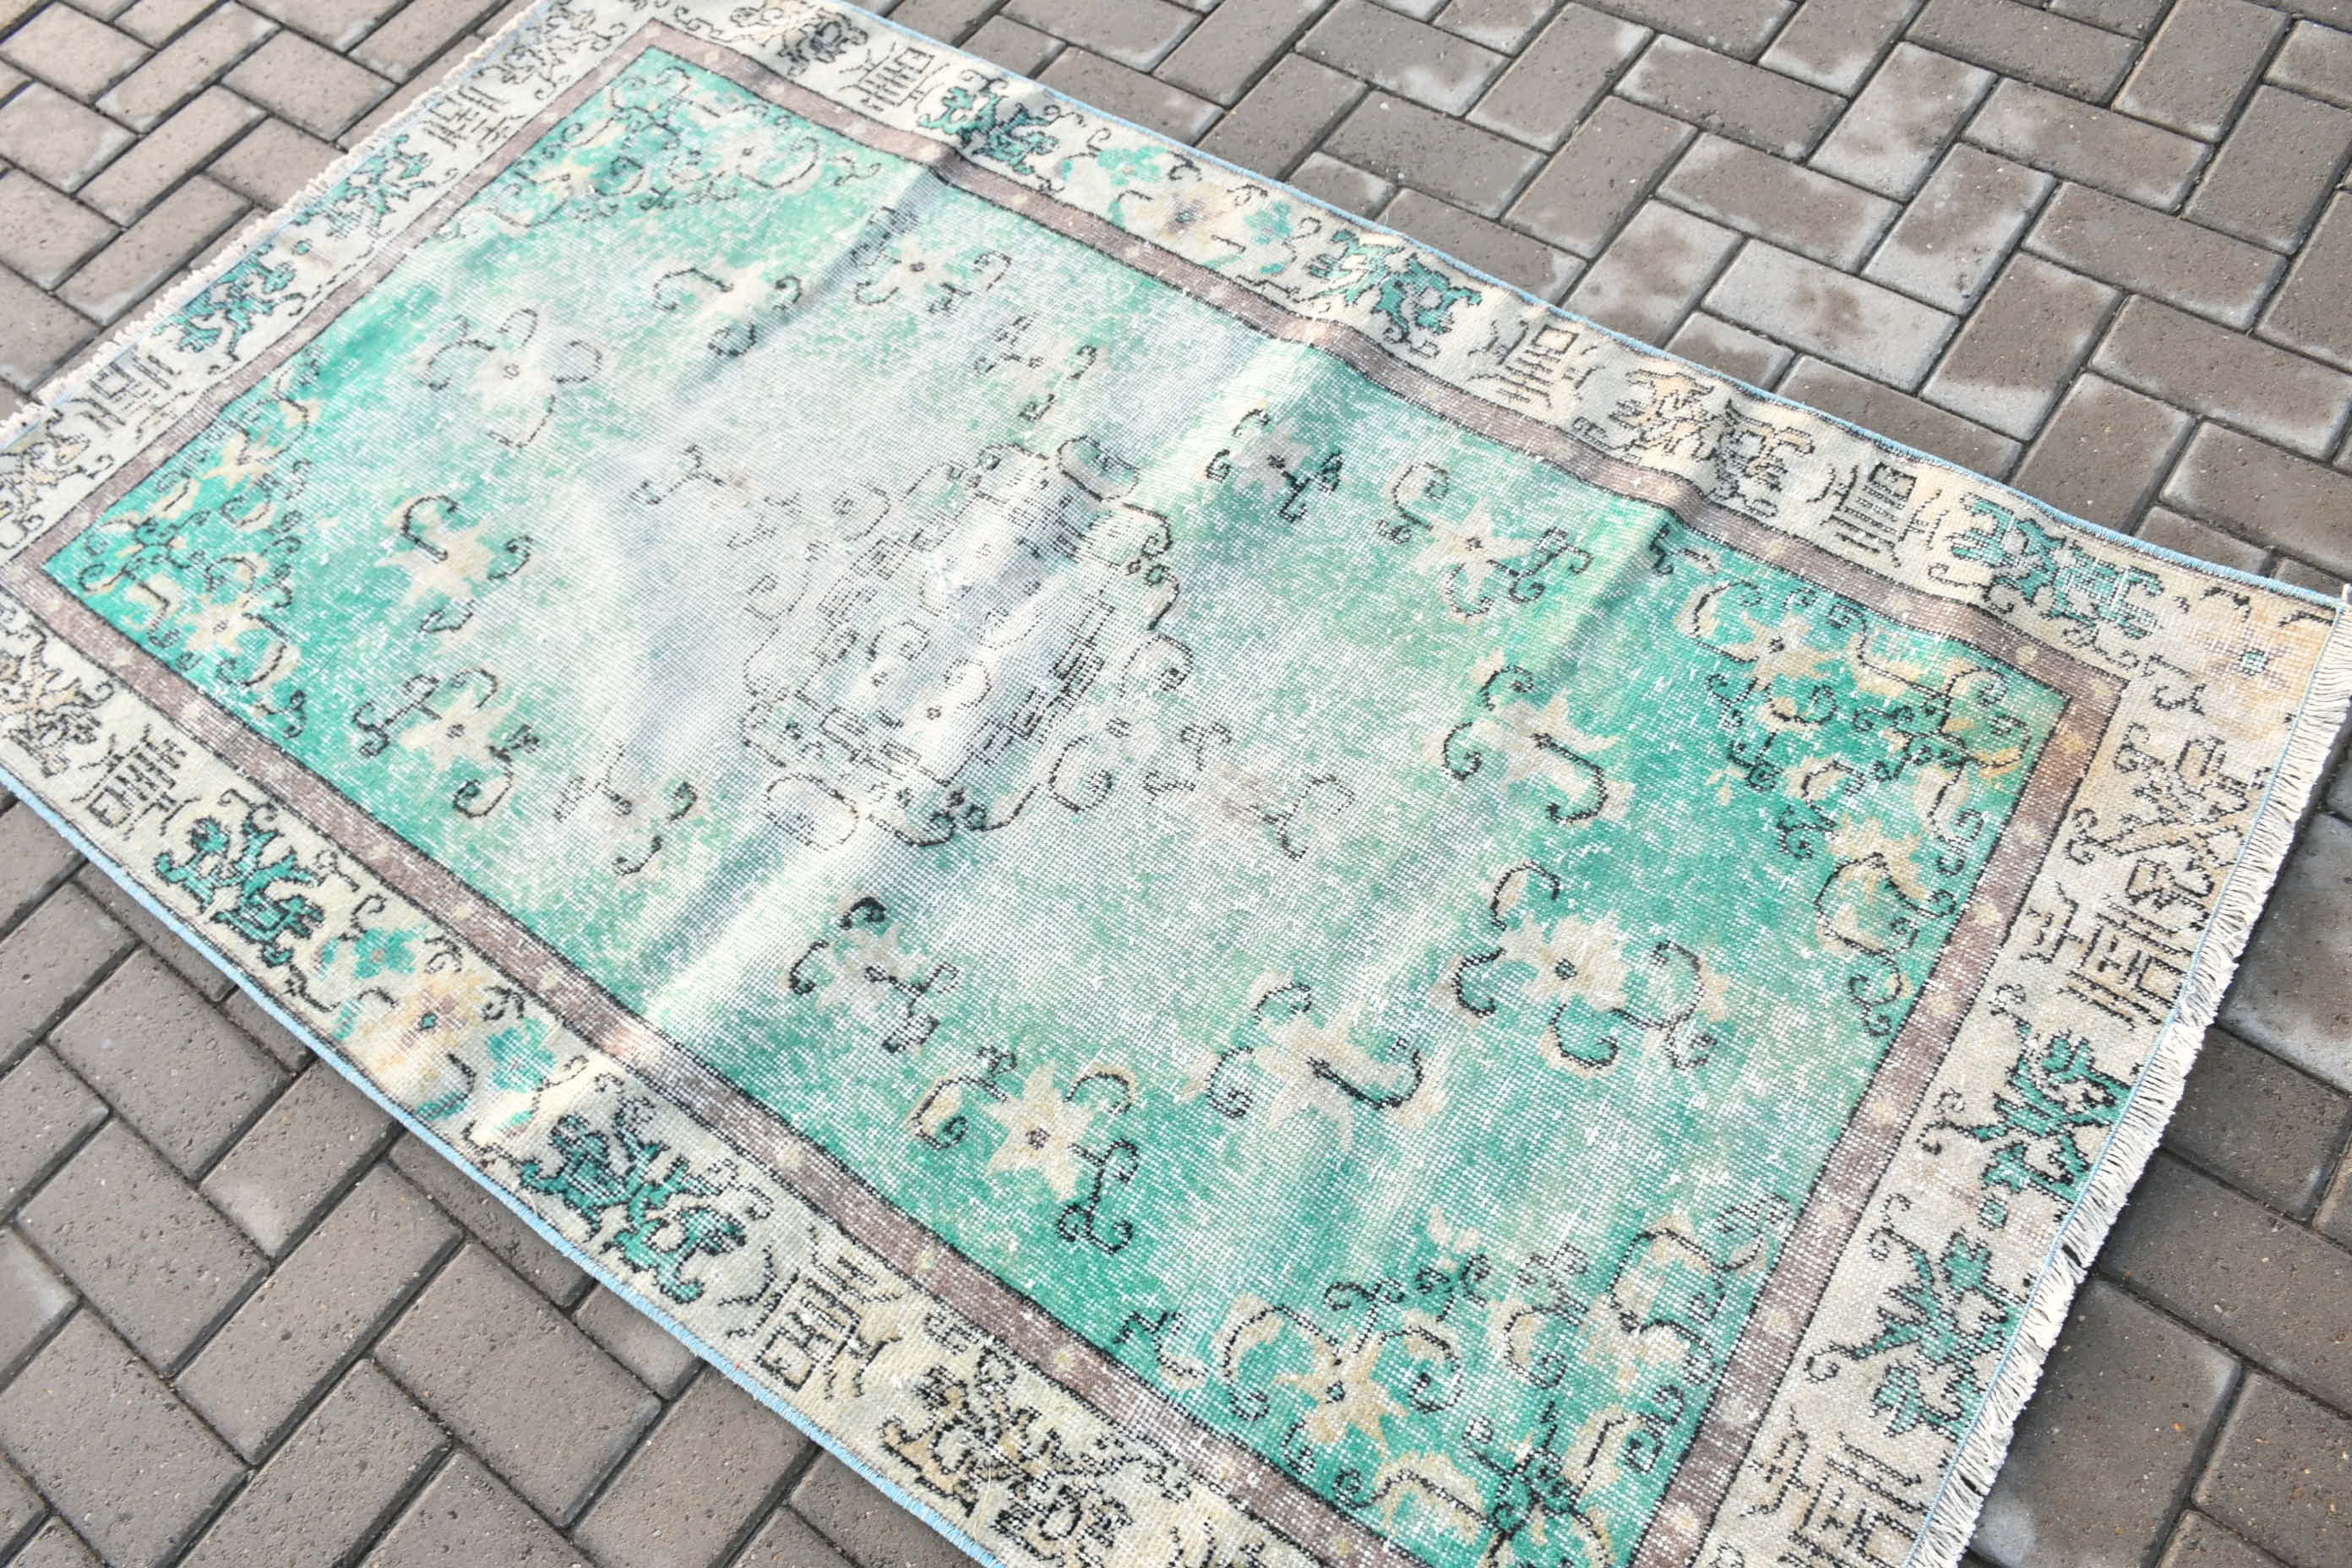 Anatolian Rug, Oushak Rugs, Green Bedroom Rugs, Turkish Rug, Entry Rug, Kitchen Rug, Vintage Rug, Rugs for Bedroom, 3.6x6.1 ft Accent Rugs